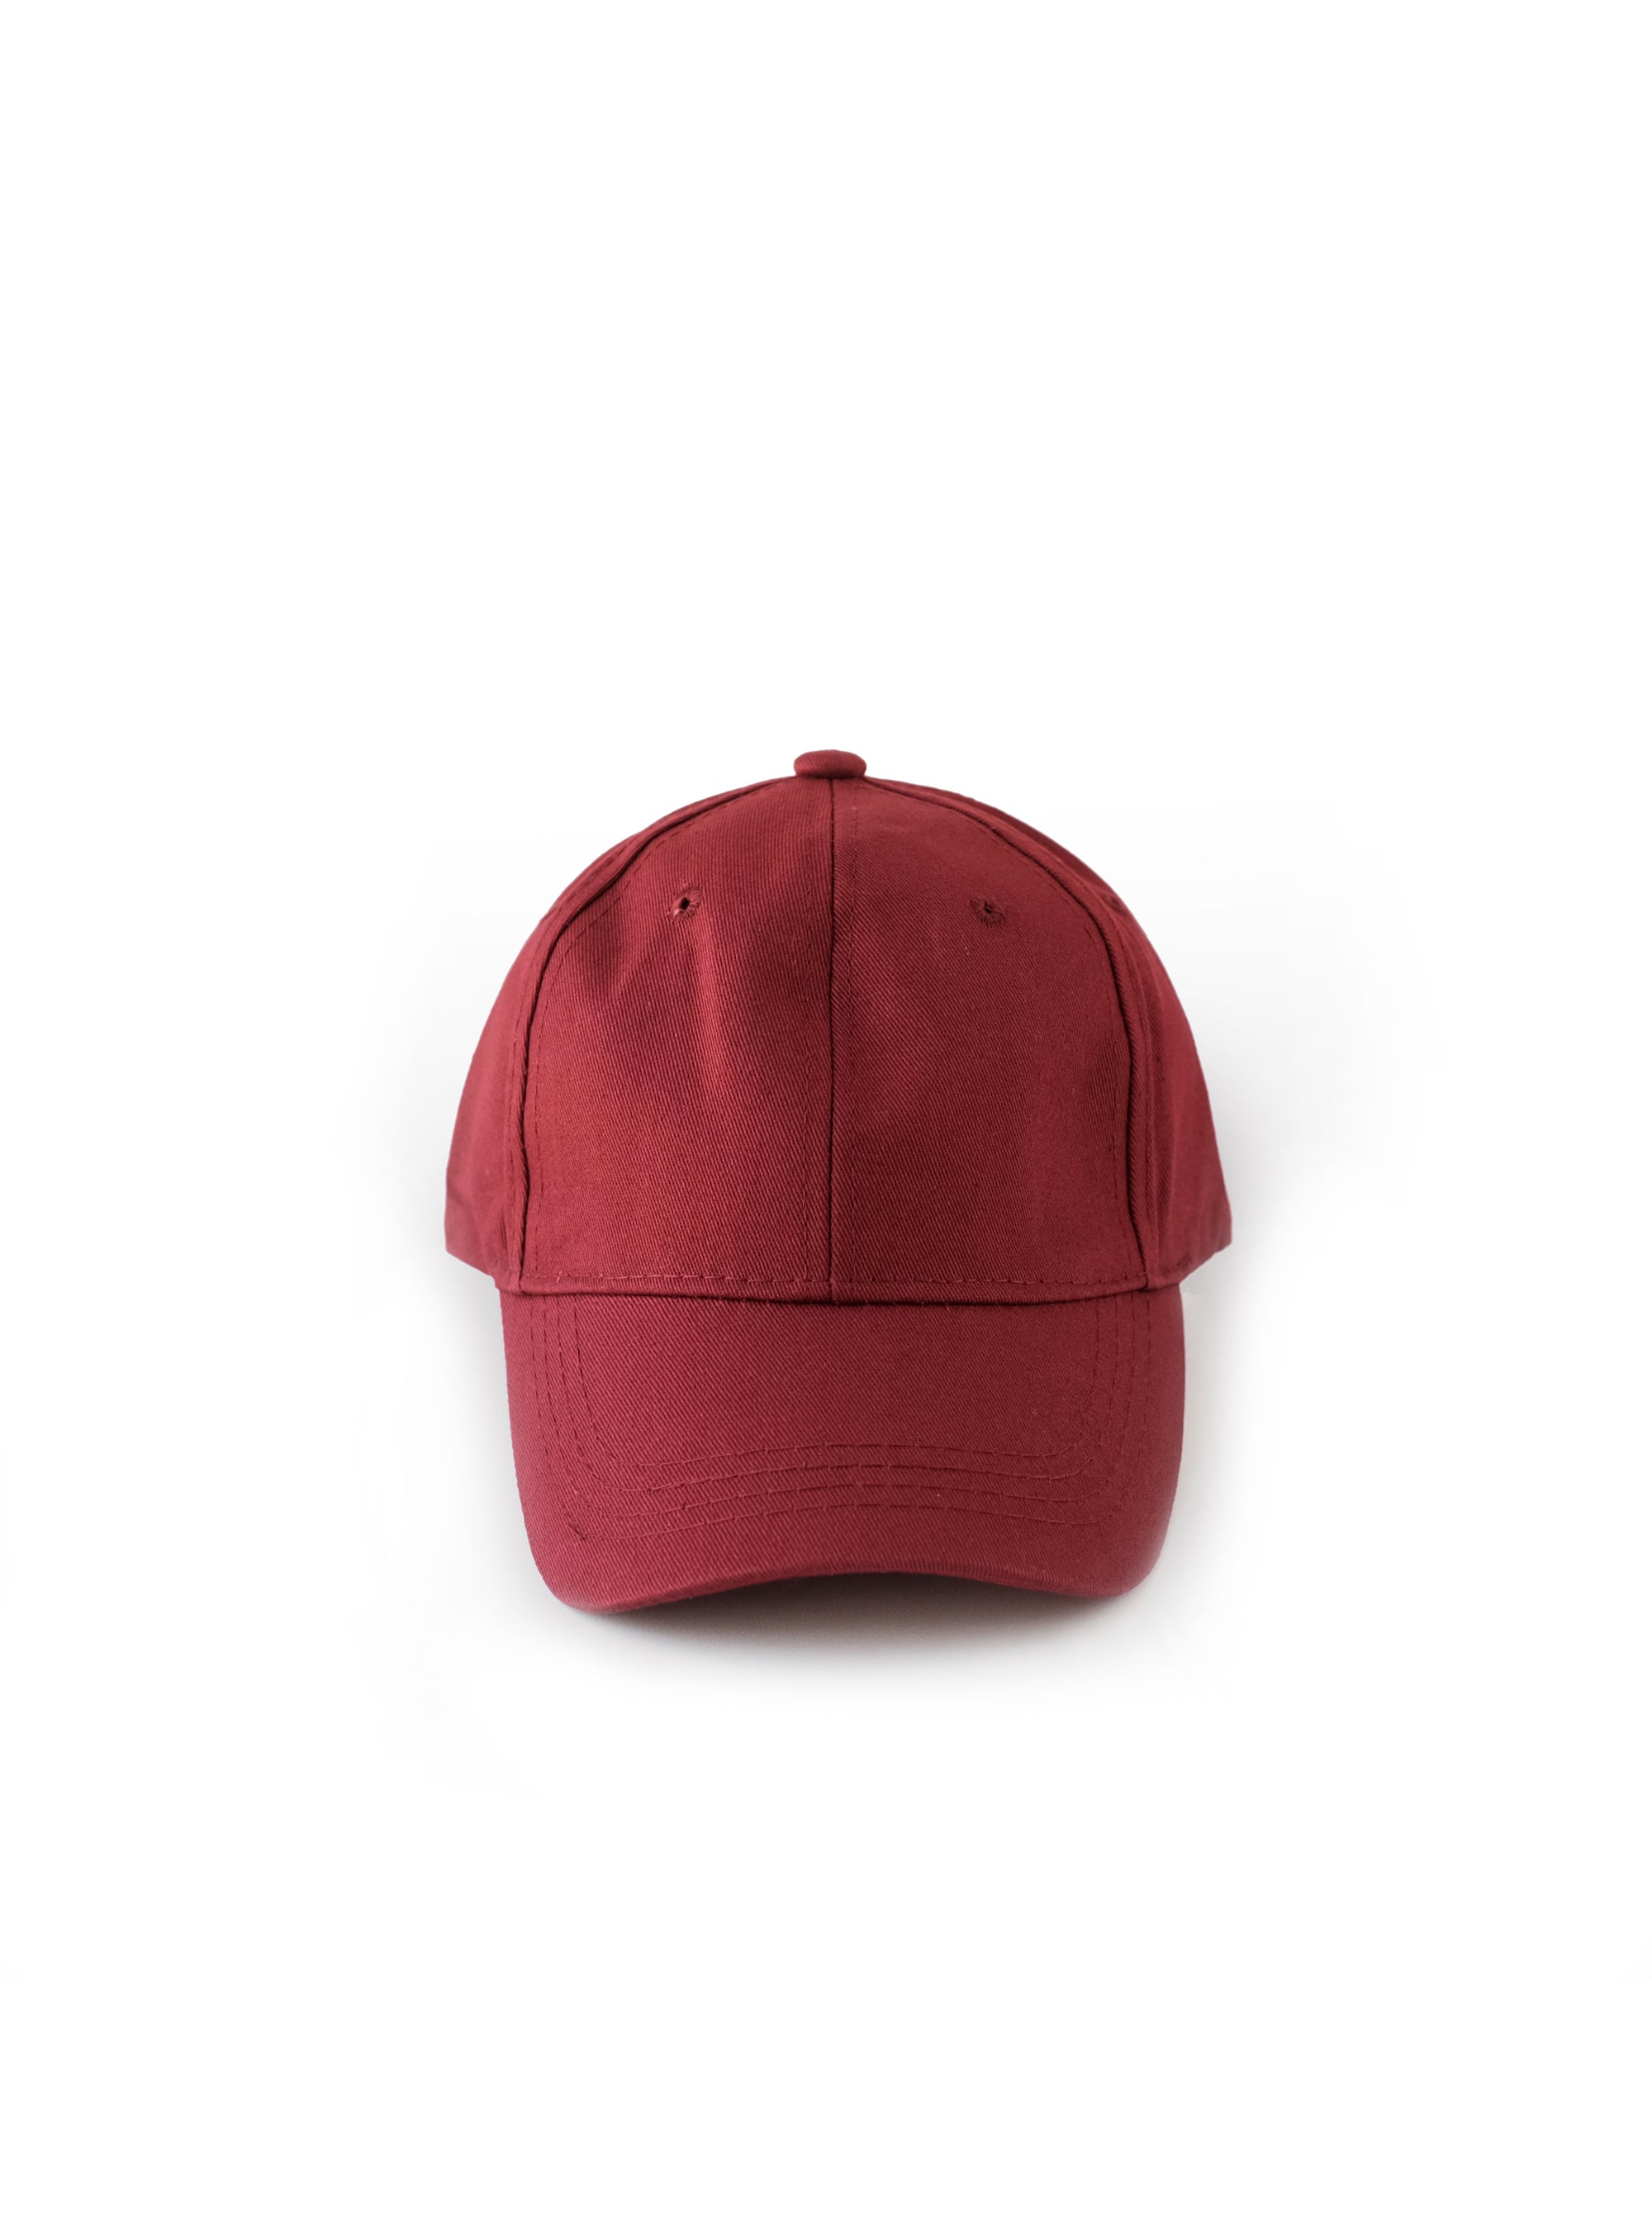 red cherry cap with adjustable strap